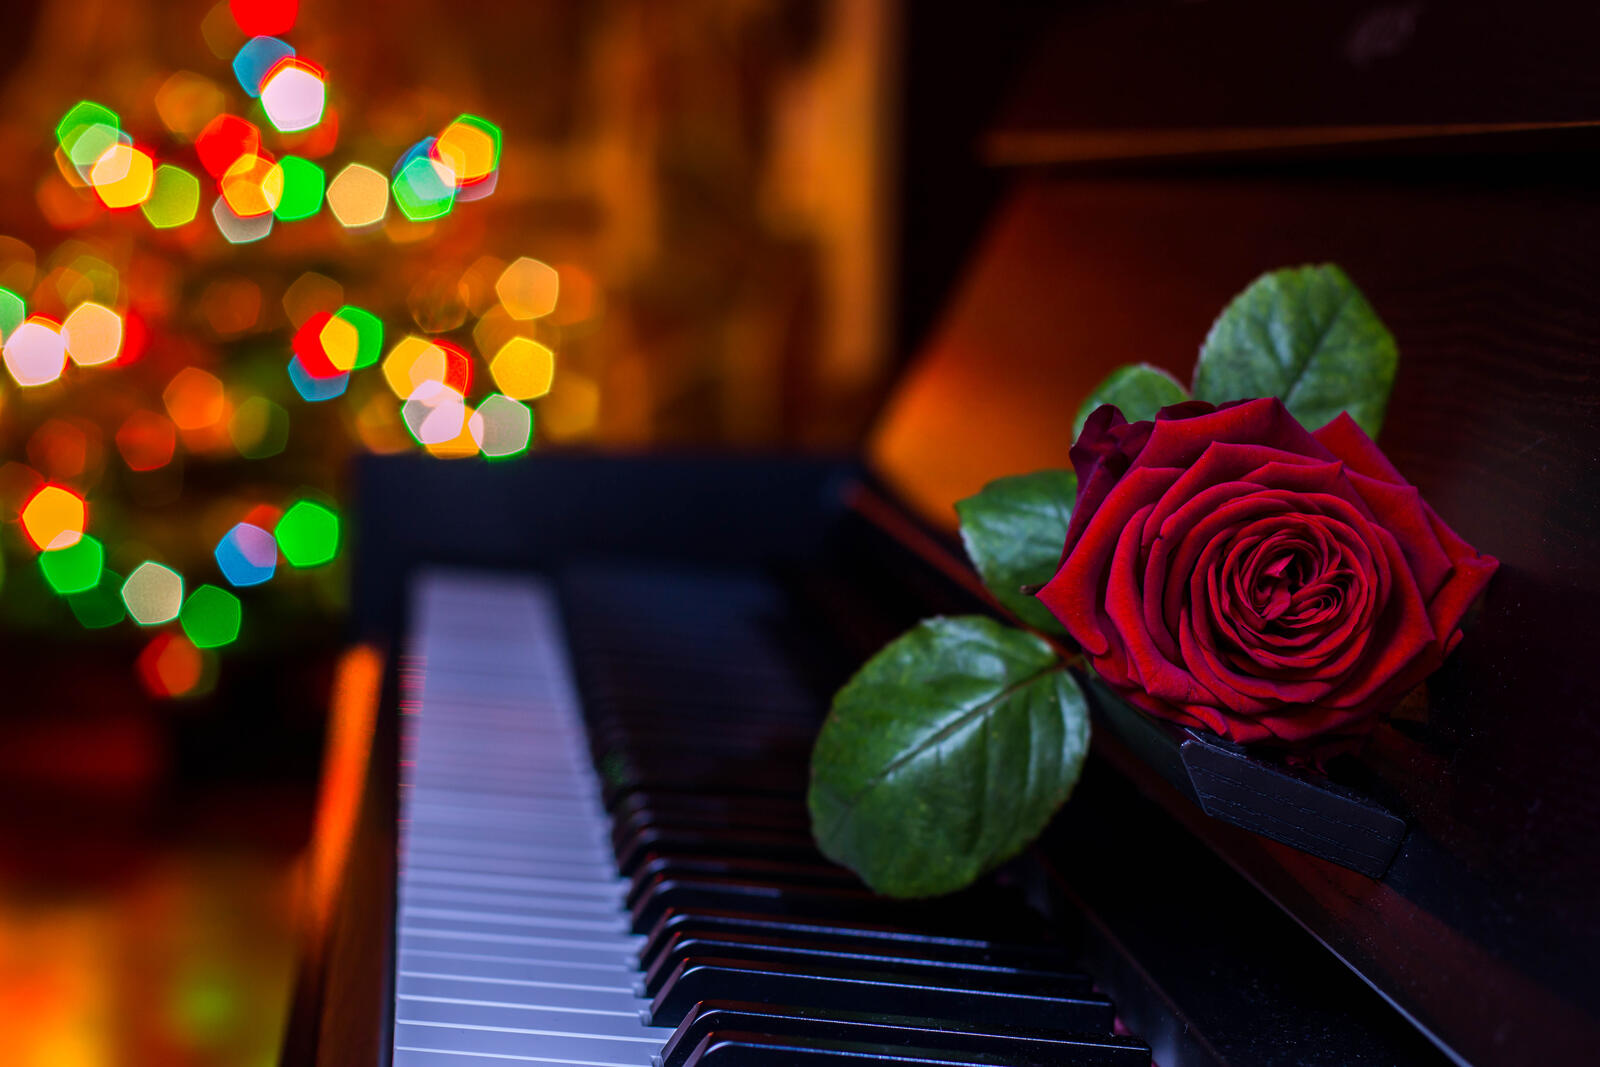 Wallpapers rose piano shimmer on the desktop